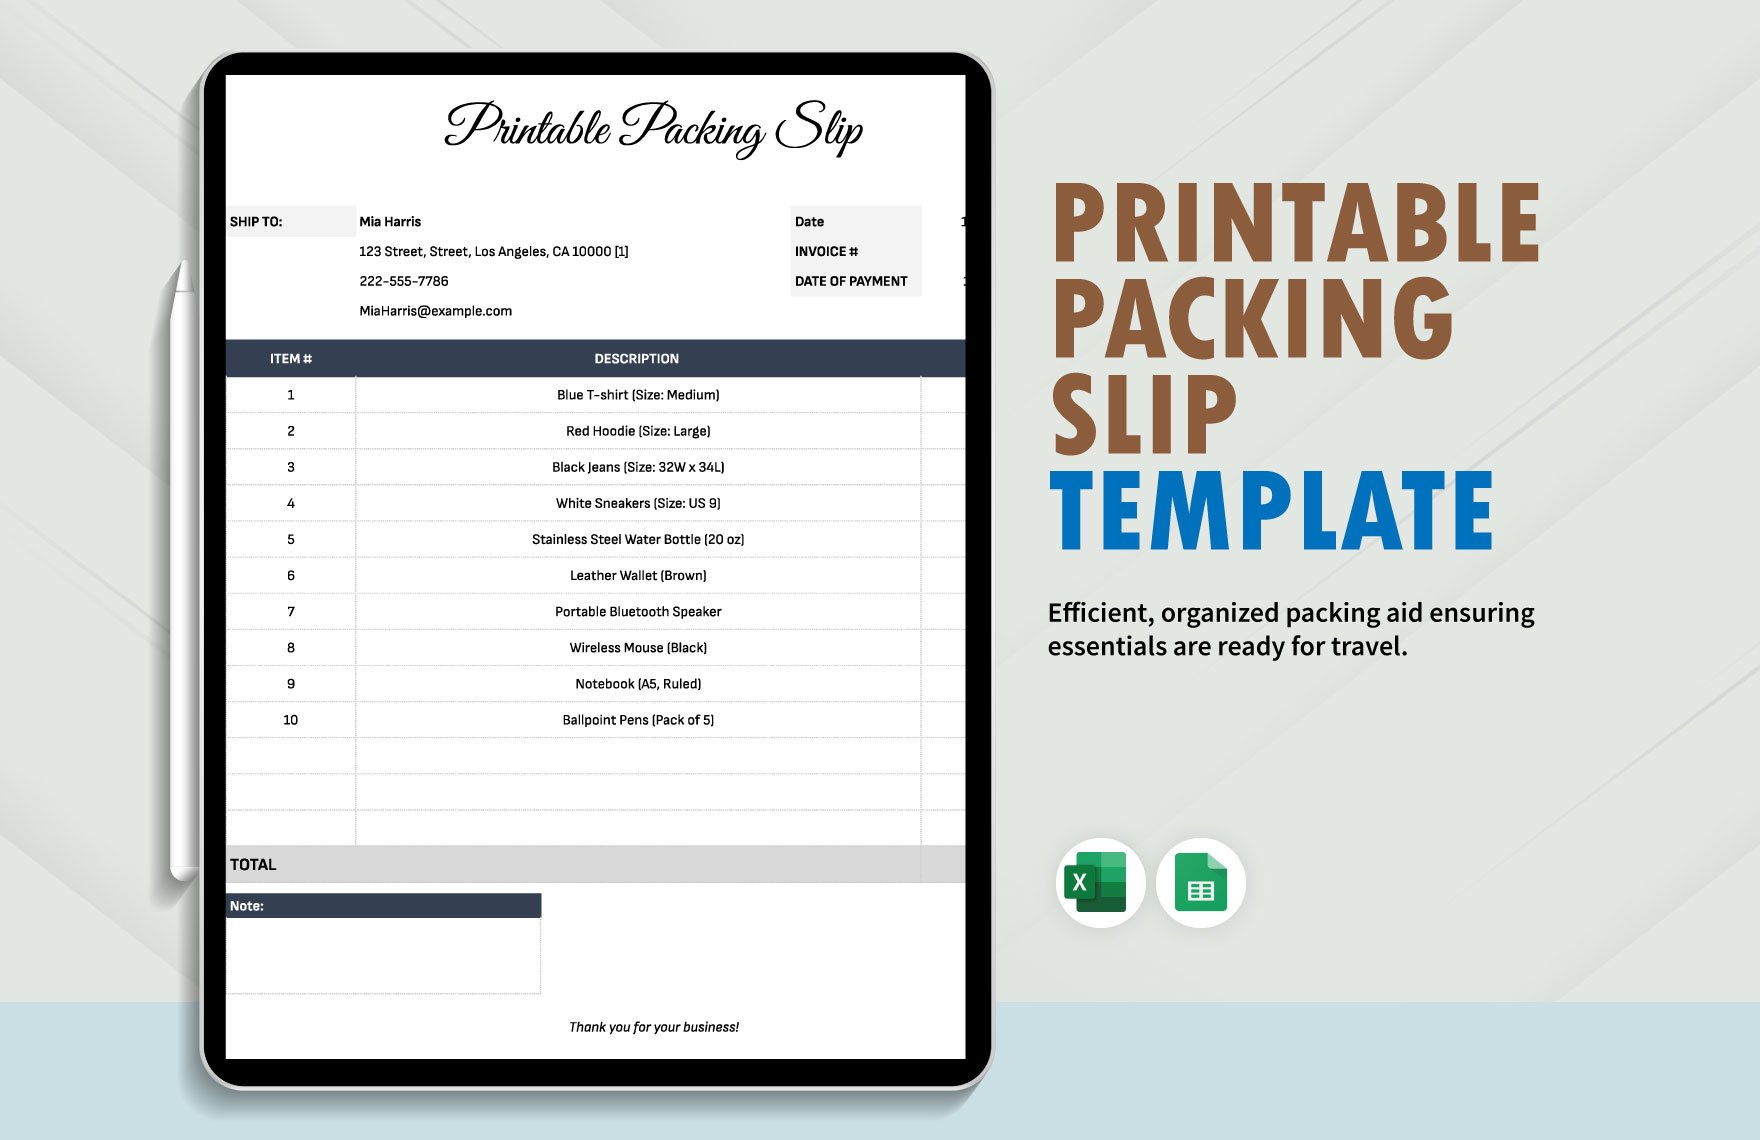 Printable Packing Slip Template in Excel, Google Sheets